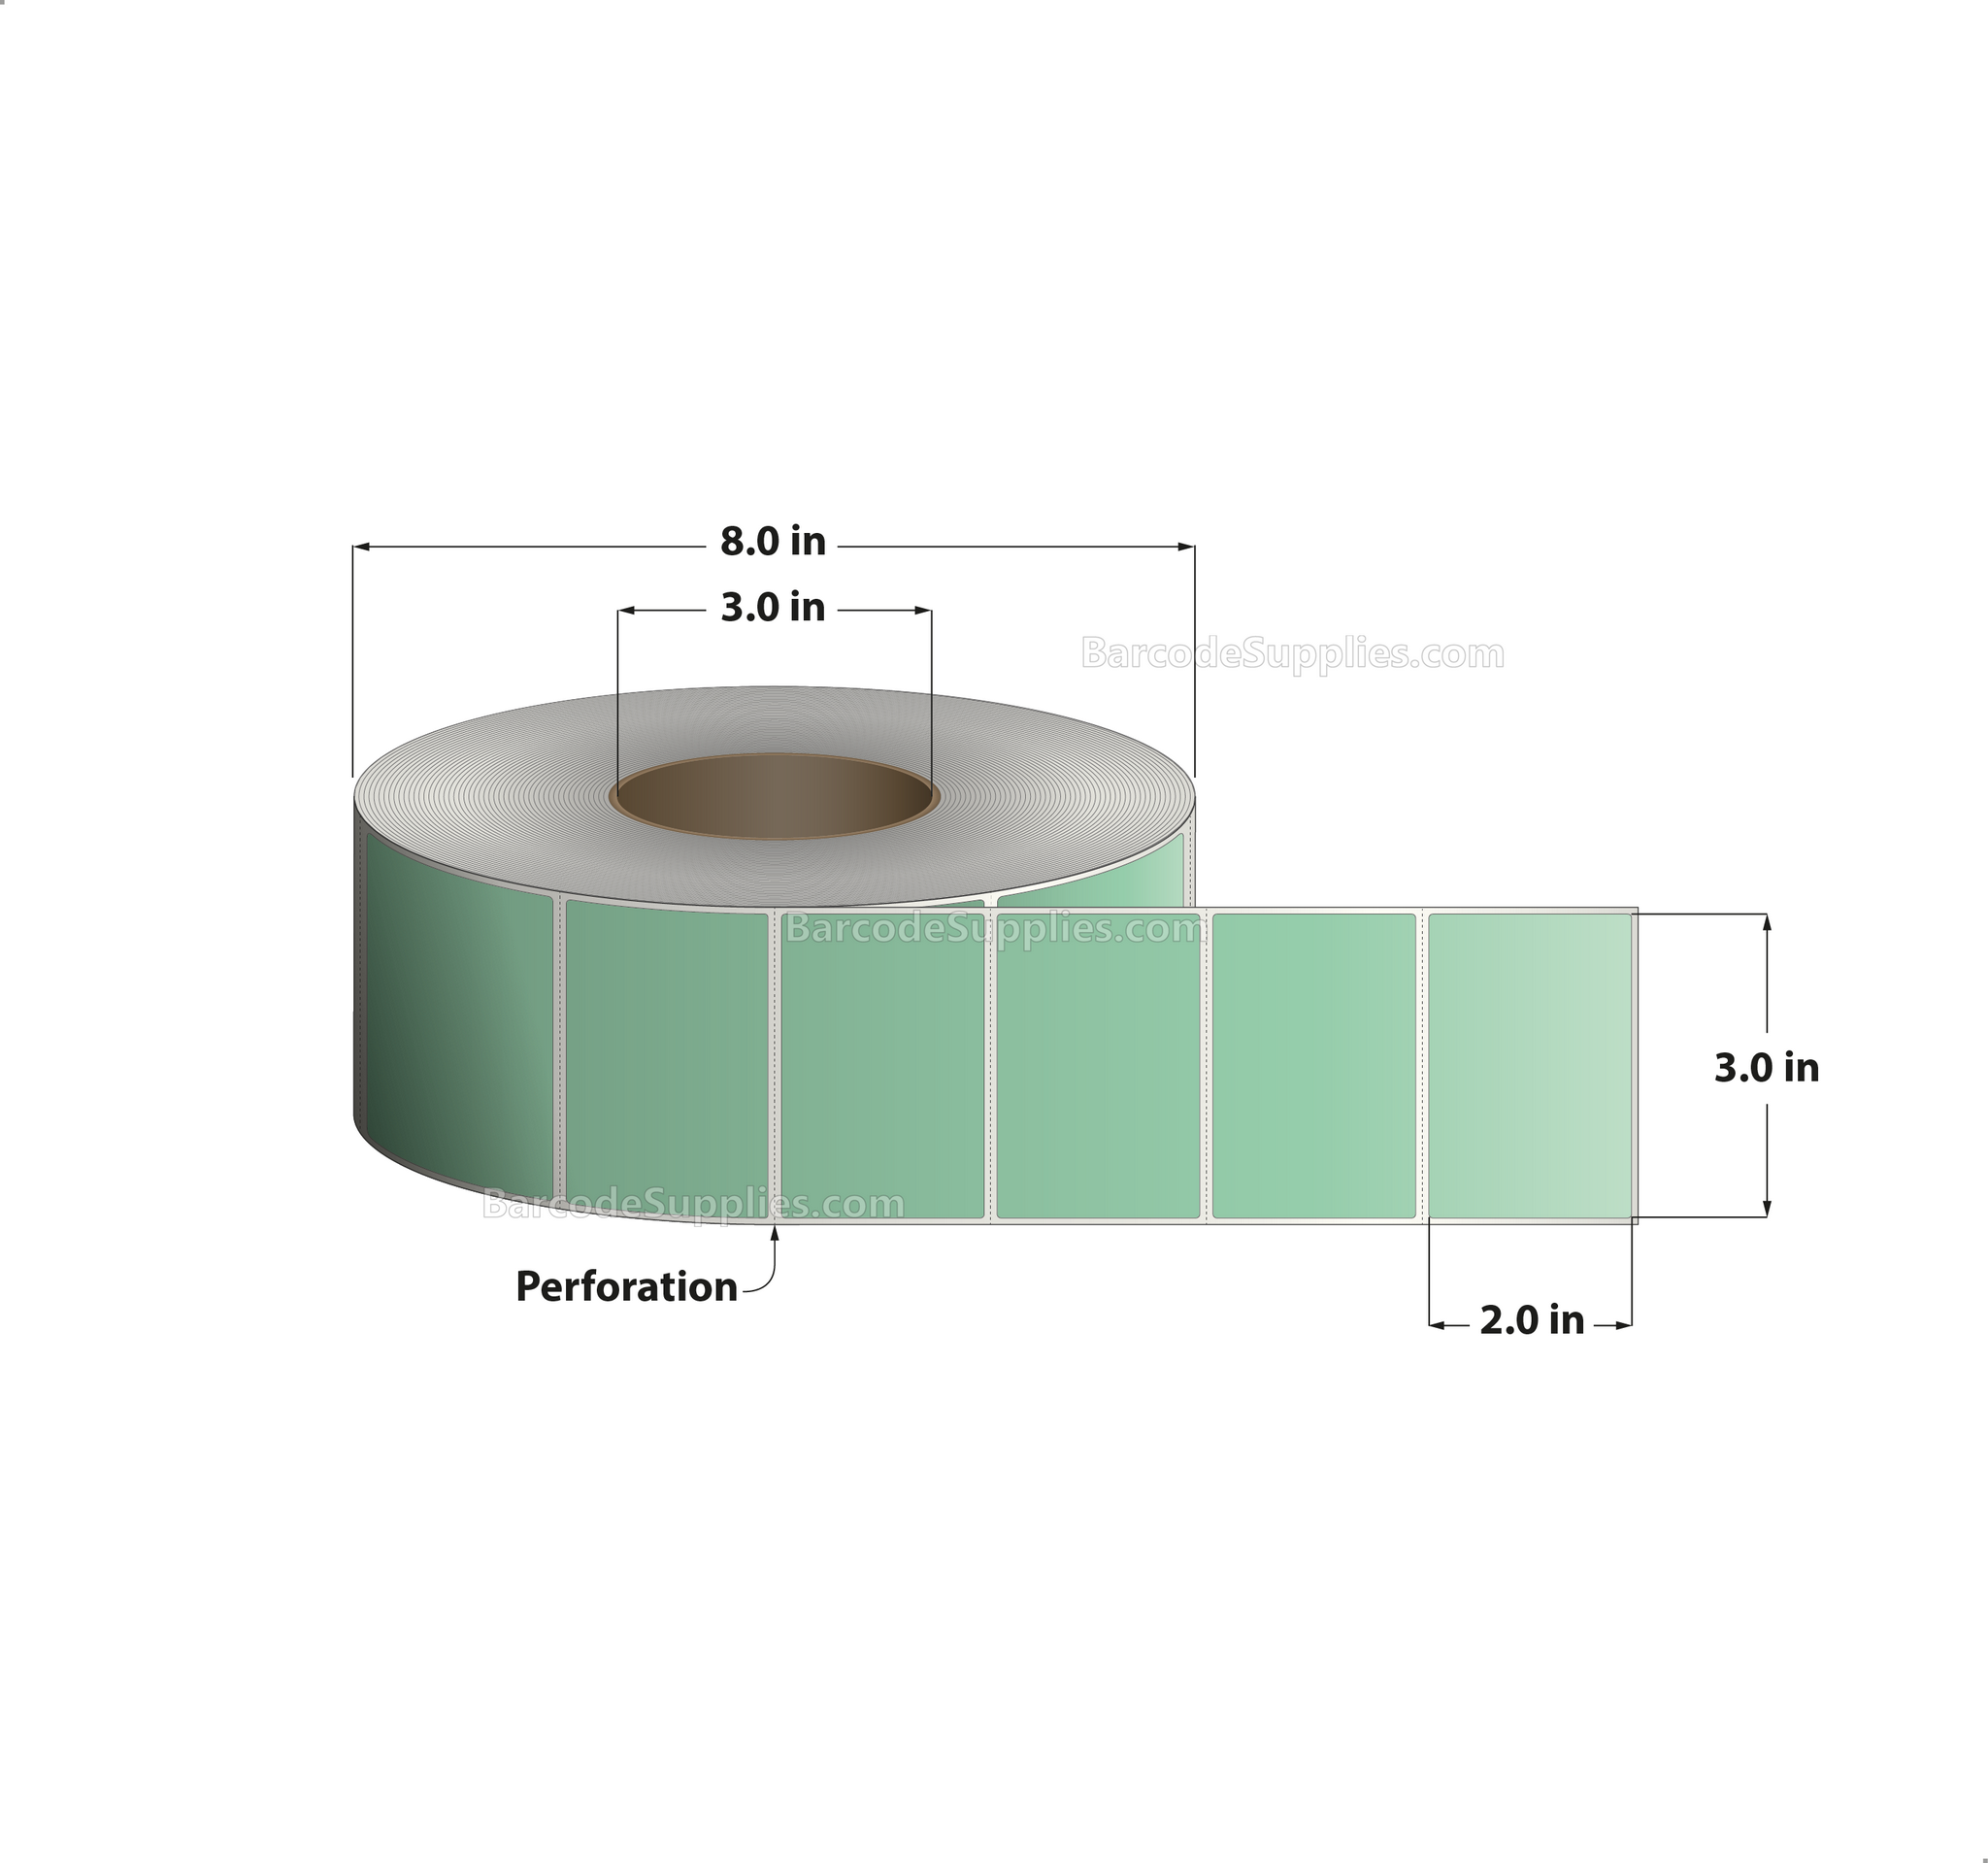 3 x 2 Thermal Transfer 345 Green Labels With Permanent Adhesive - Perforated - 2900 Labels Per Roll - Carton Of 8 Rolls - 23200 Labels Total - MPN: RFC-3-2-2900-GR